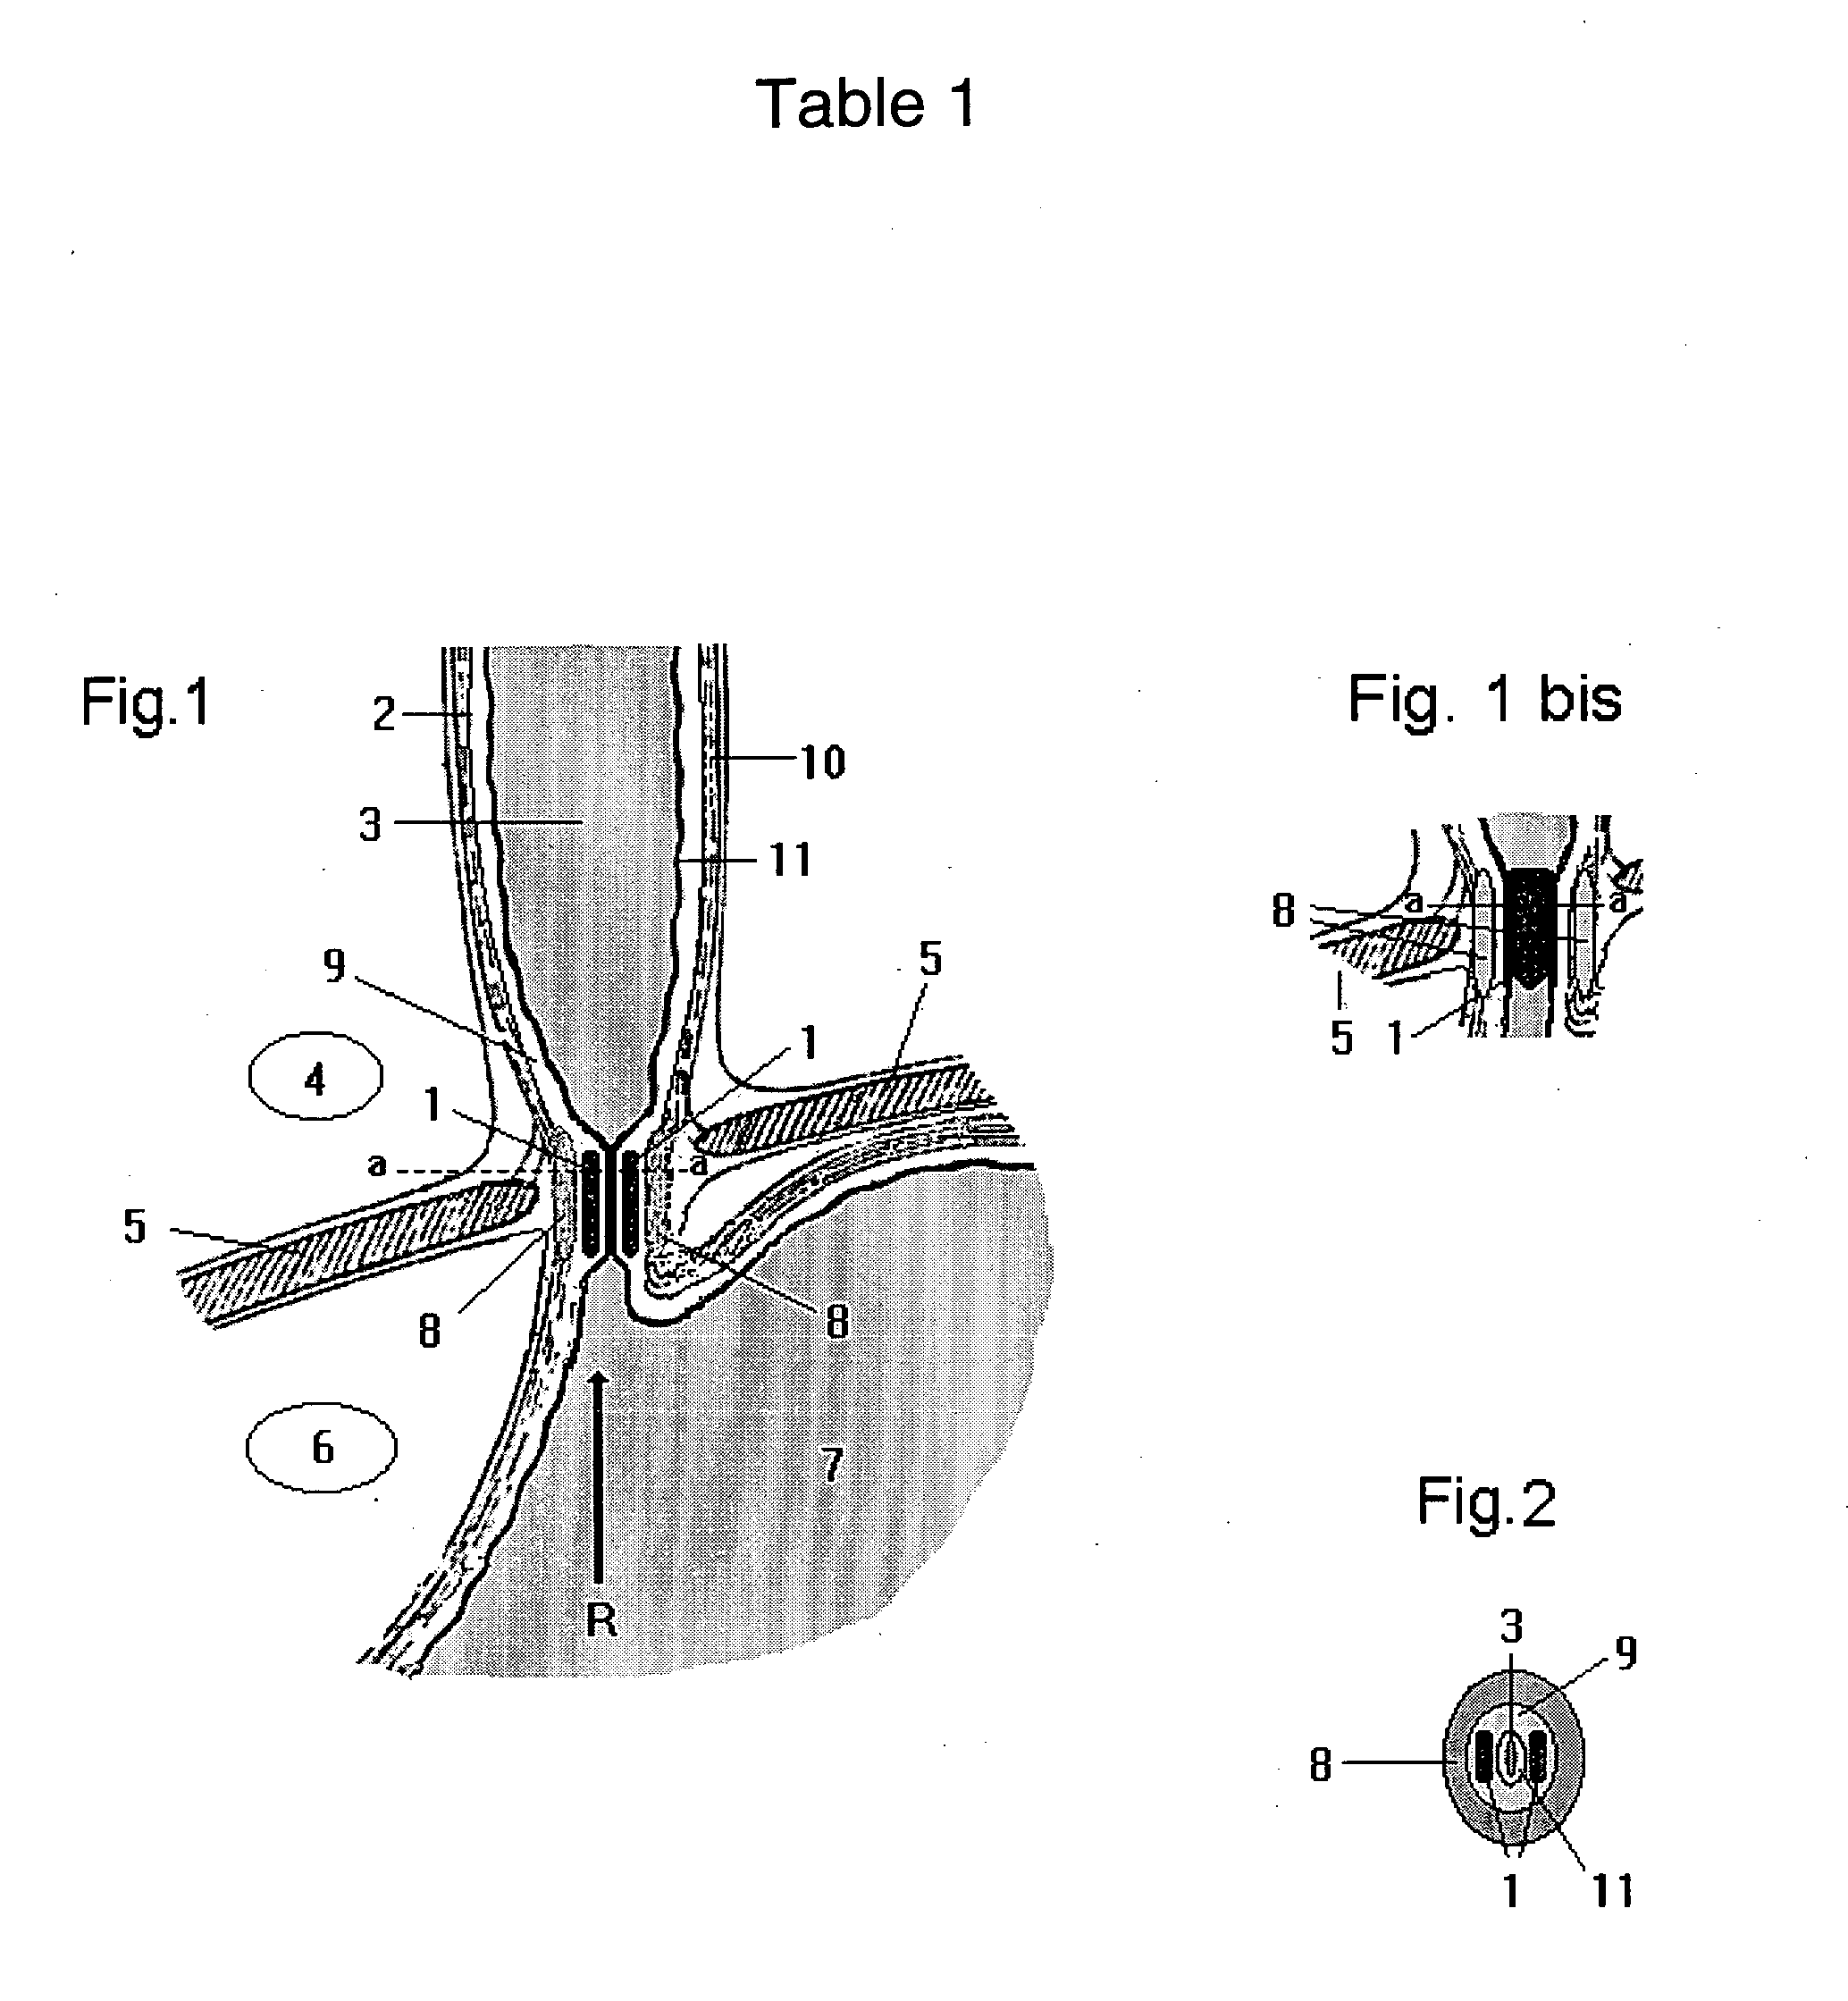 Magnetic device and method to prevent gastroesophageal reflux, fecal incontinence and urinary incontinence